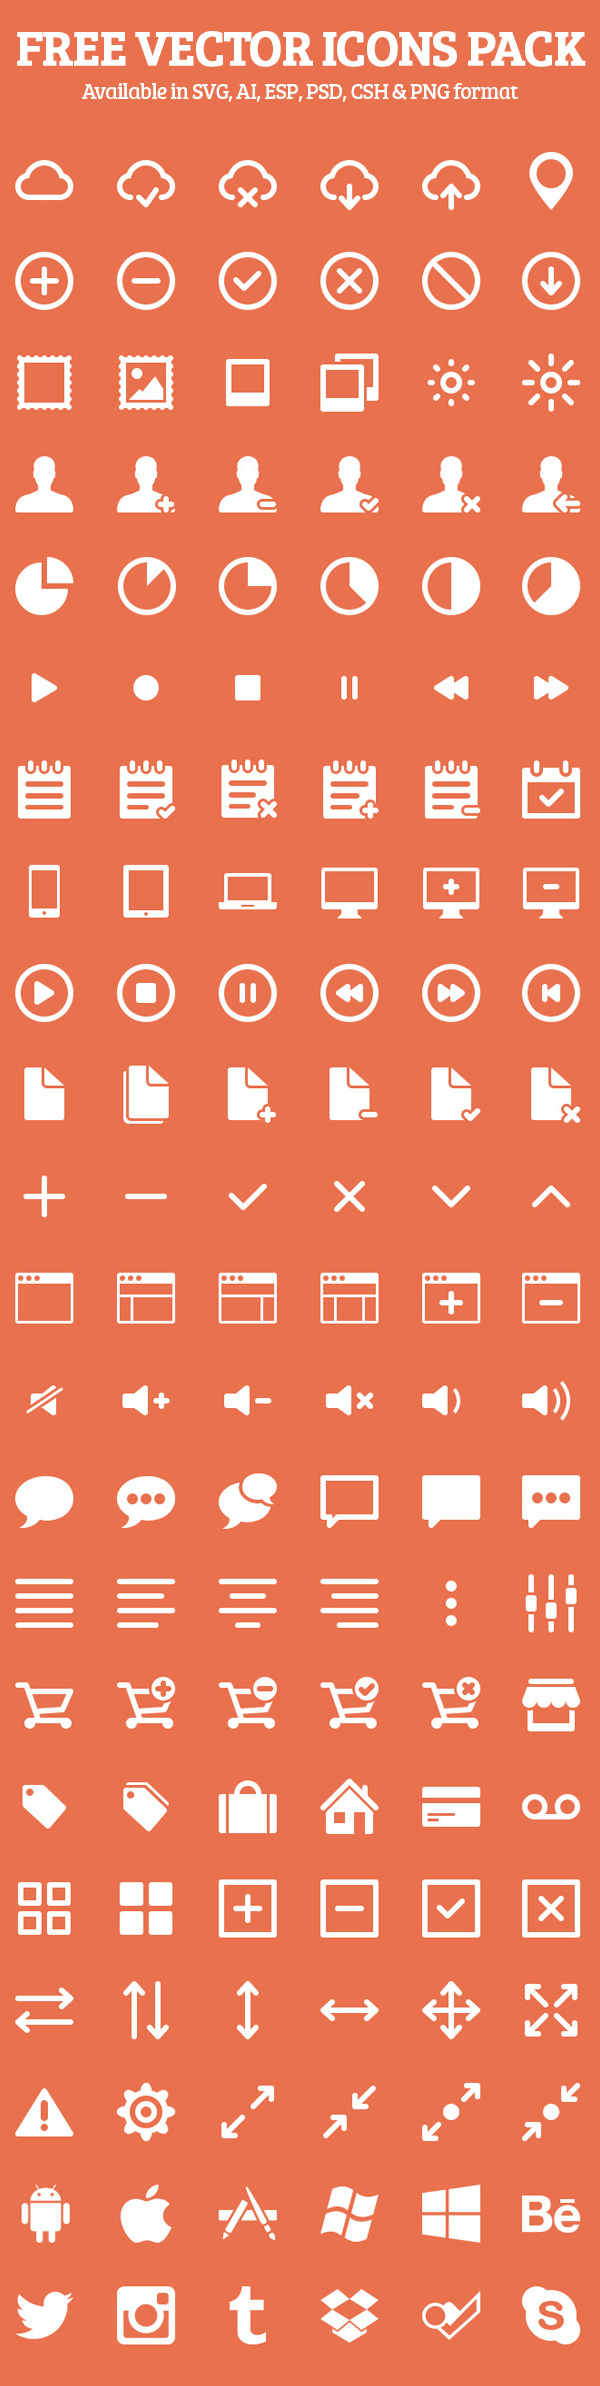 Free Vector Icons Pack Preview 1